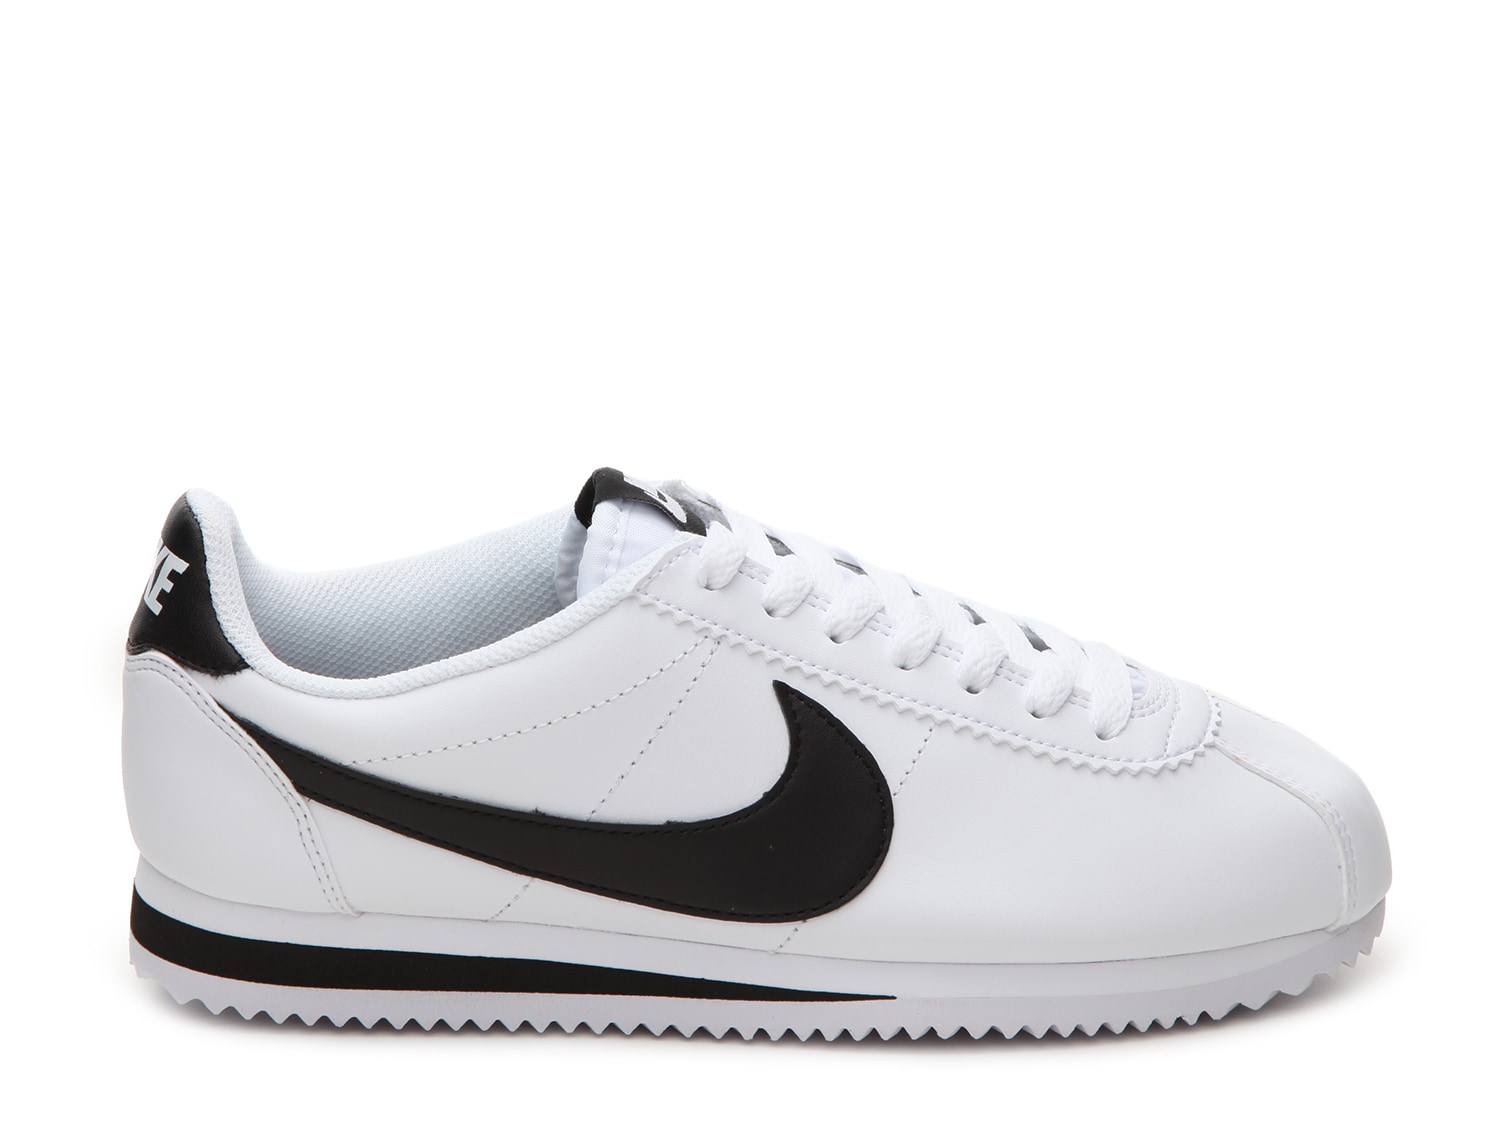 cortez shoes black and white